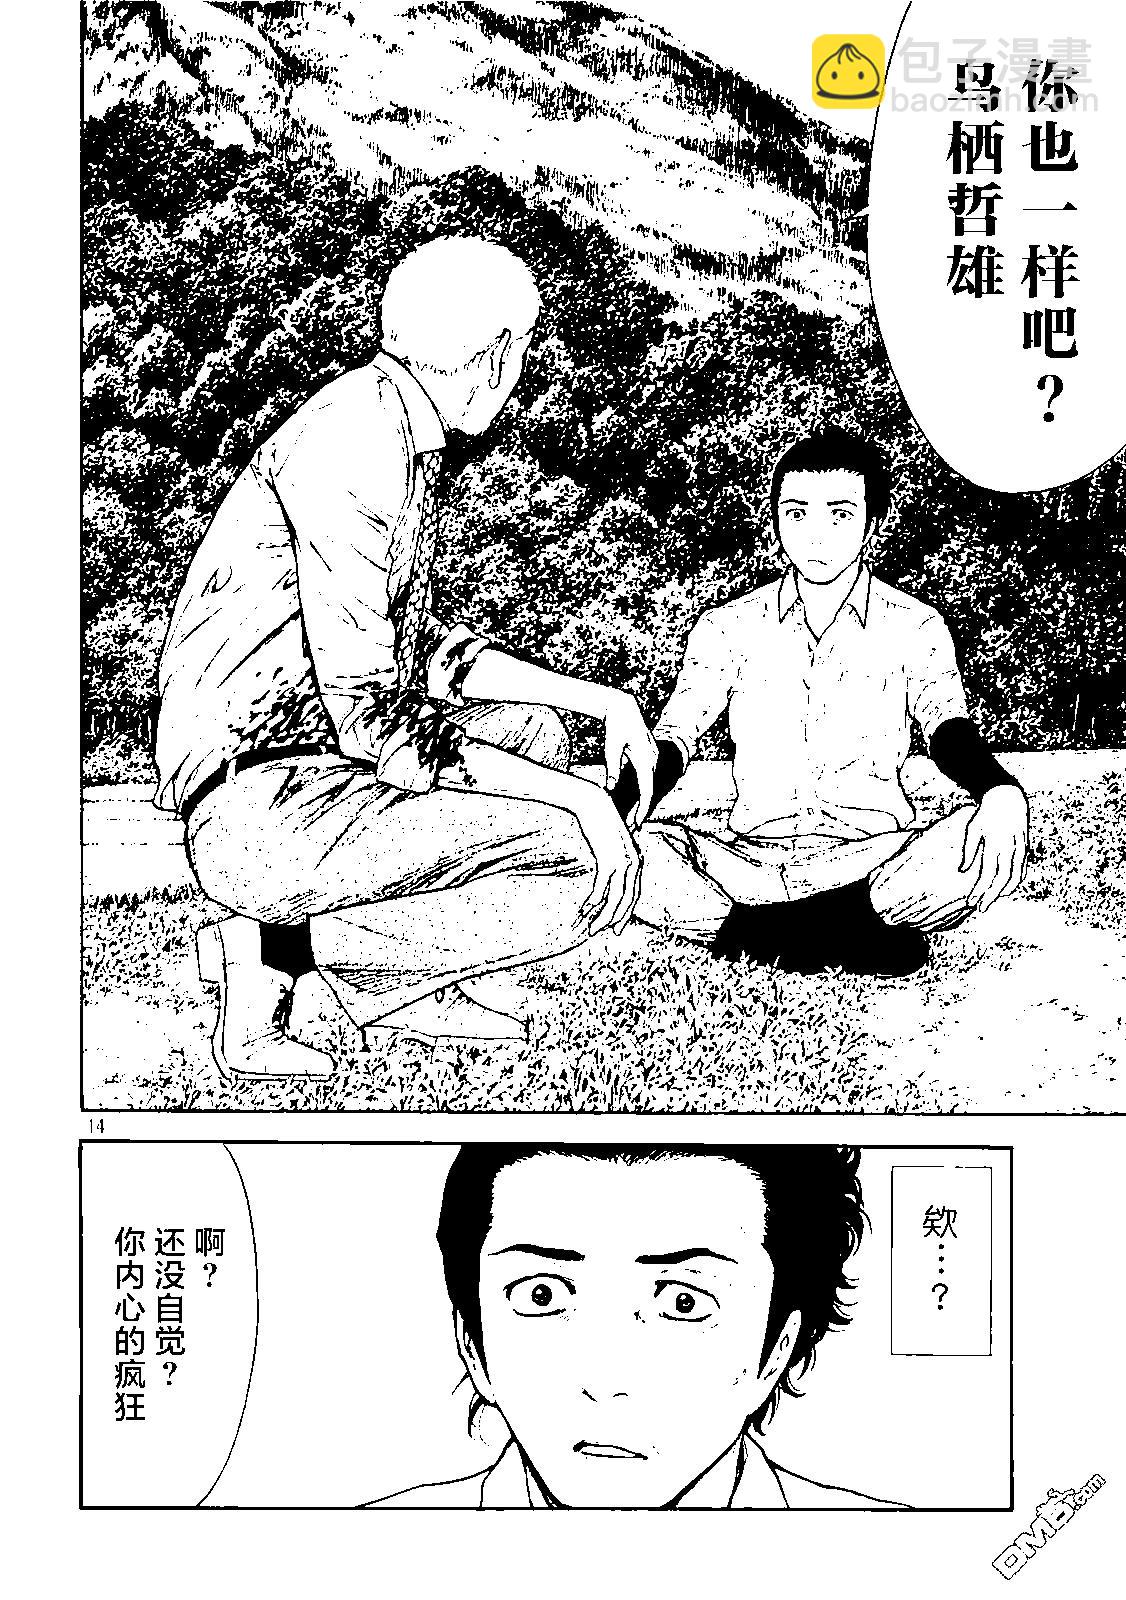 MY HOME HERO - 第146話 兩人的對話 - 4